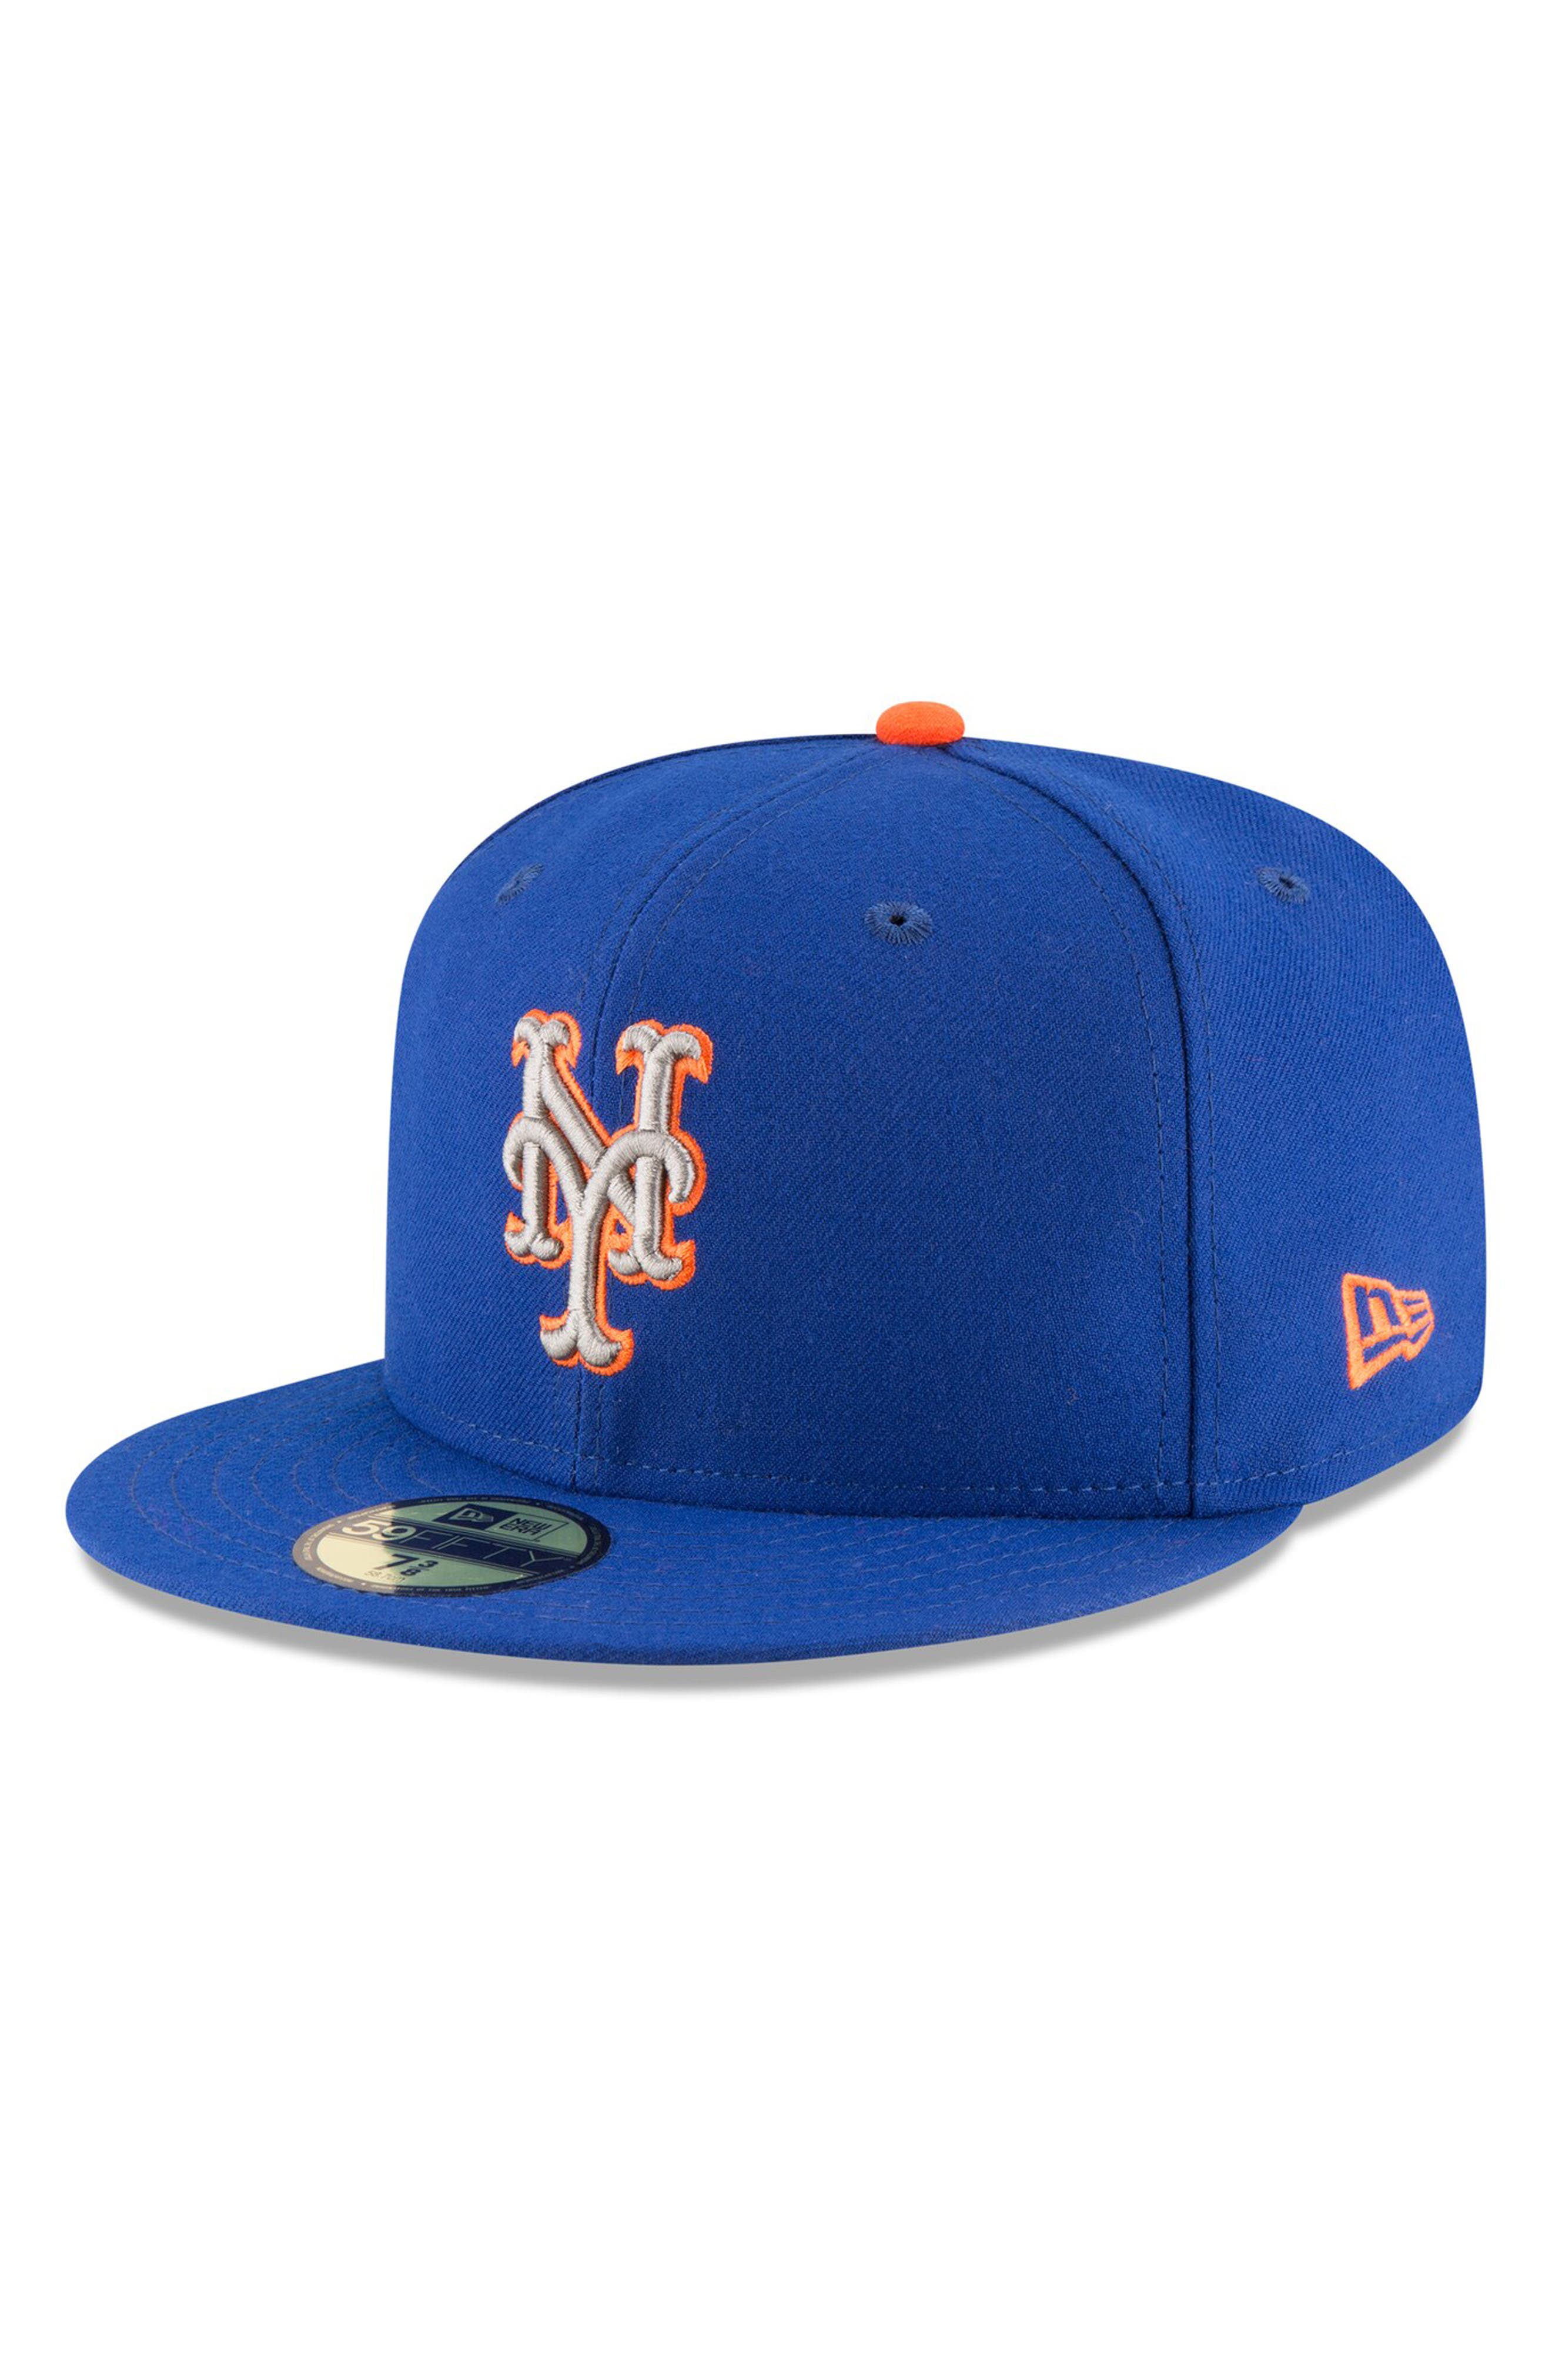 AUTHENTIC New York Mets royal New Era 59Fifty Cap 